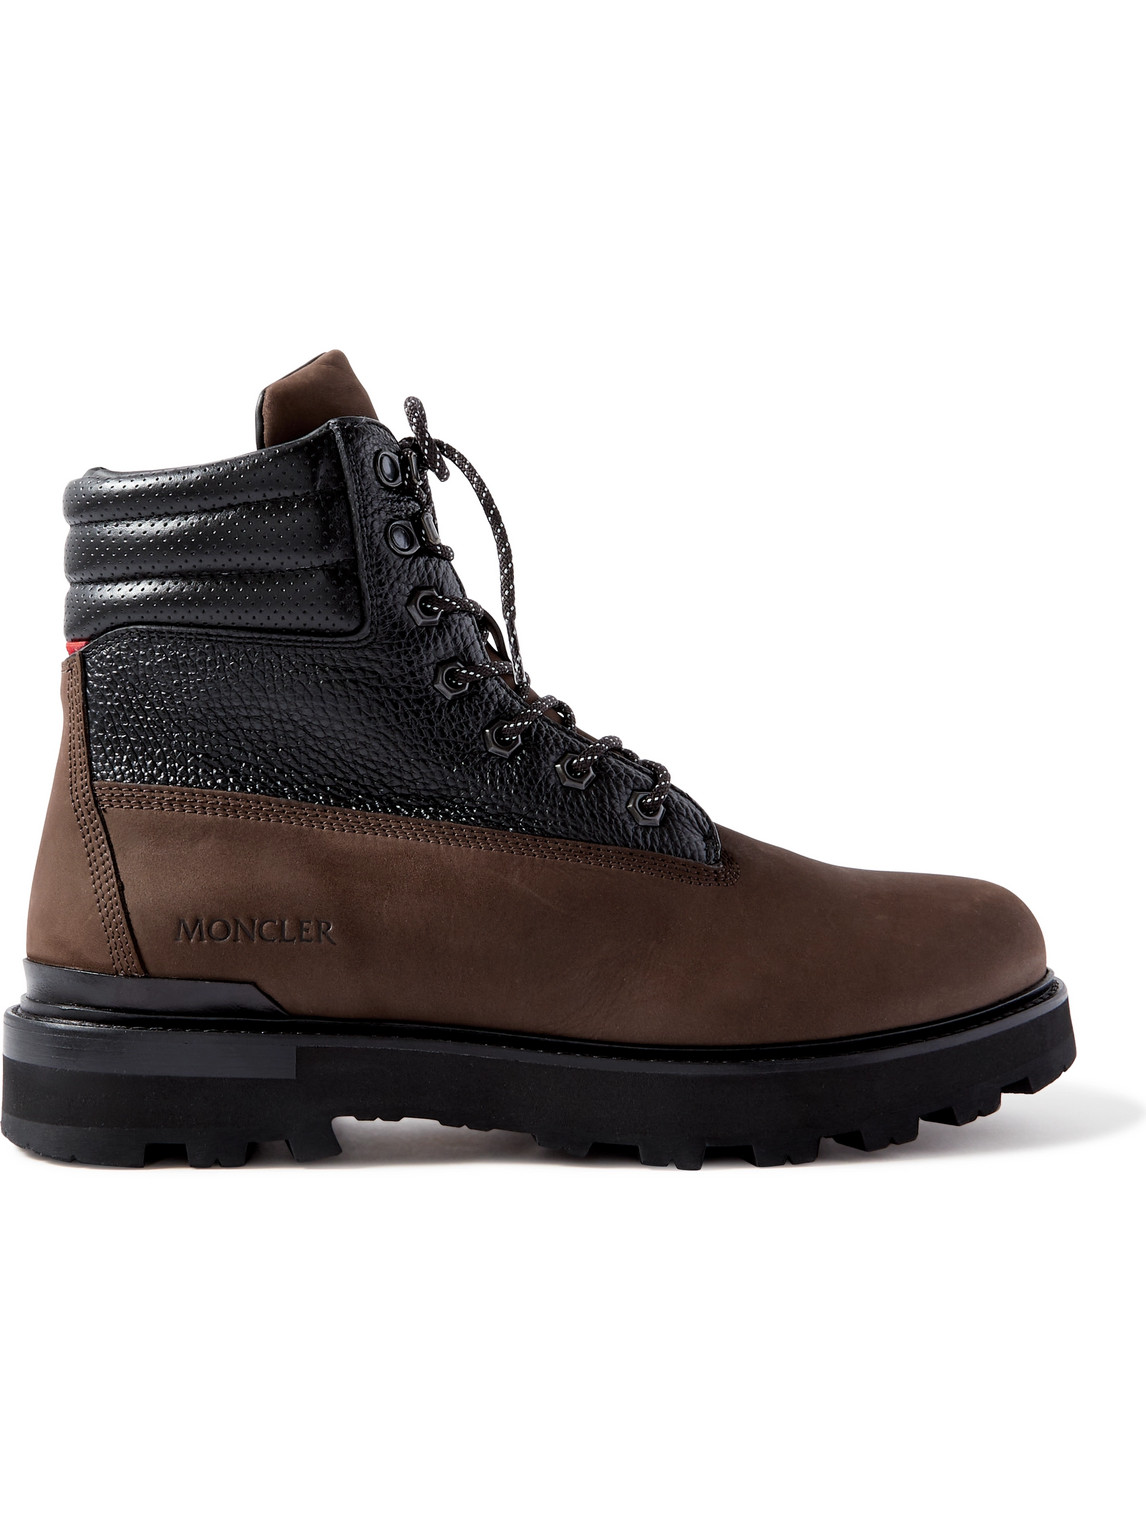 Moncler Peka Nubuck And Leather Hiking Boots In Brown